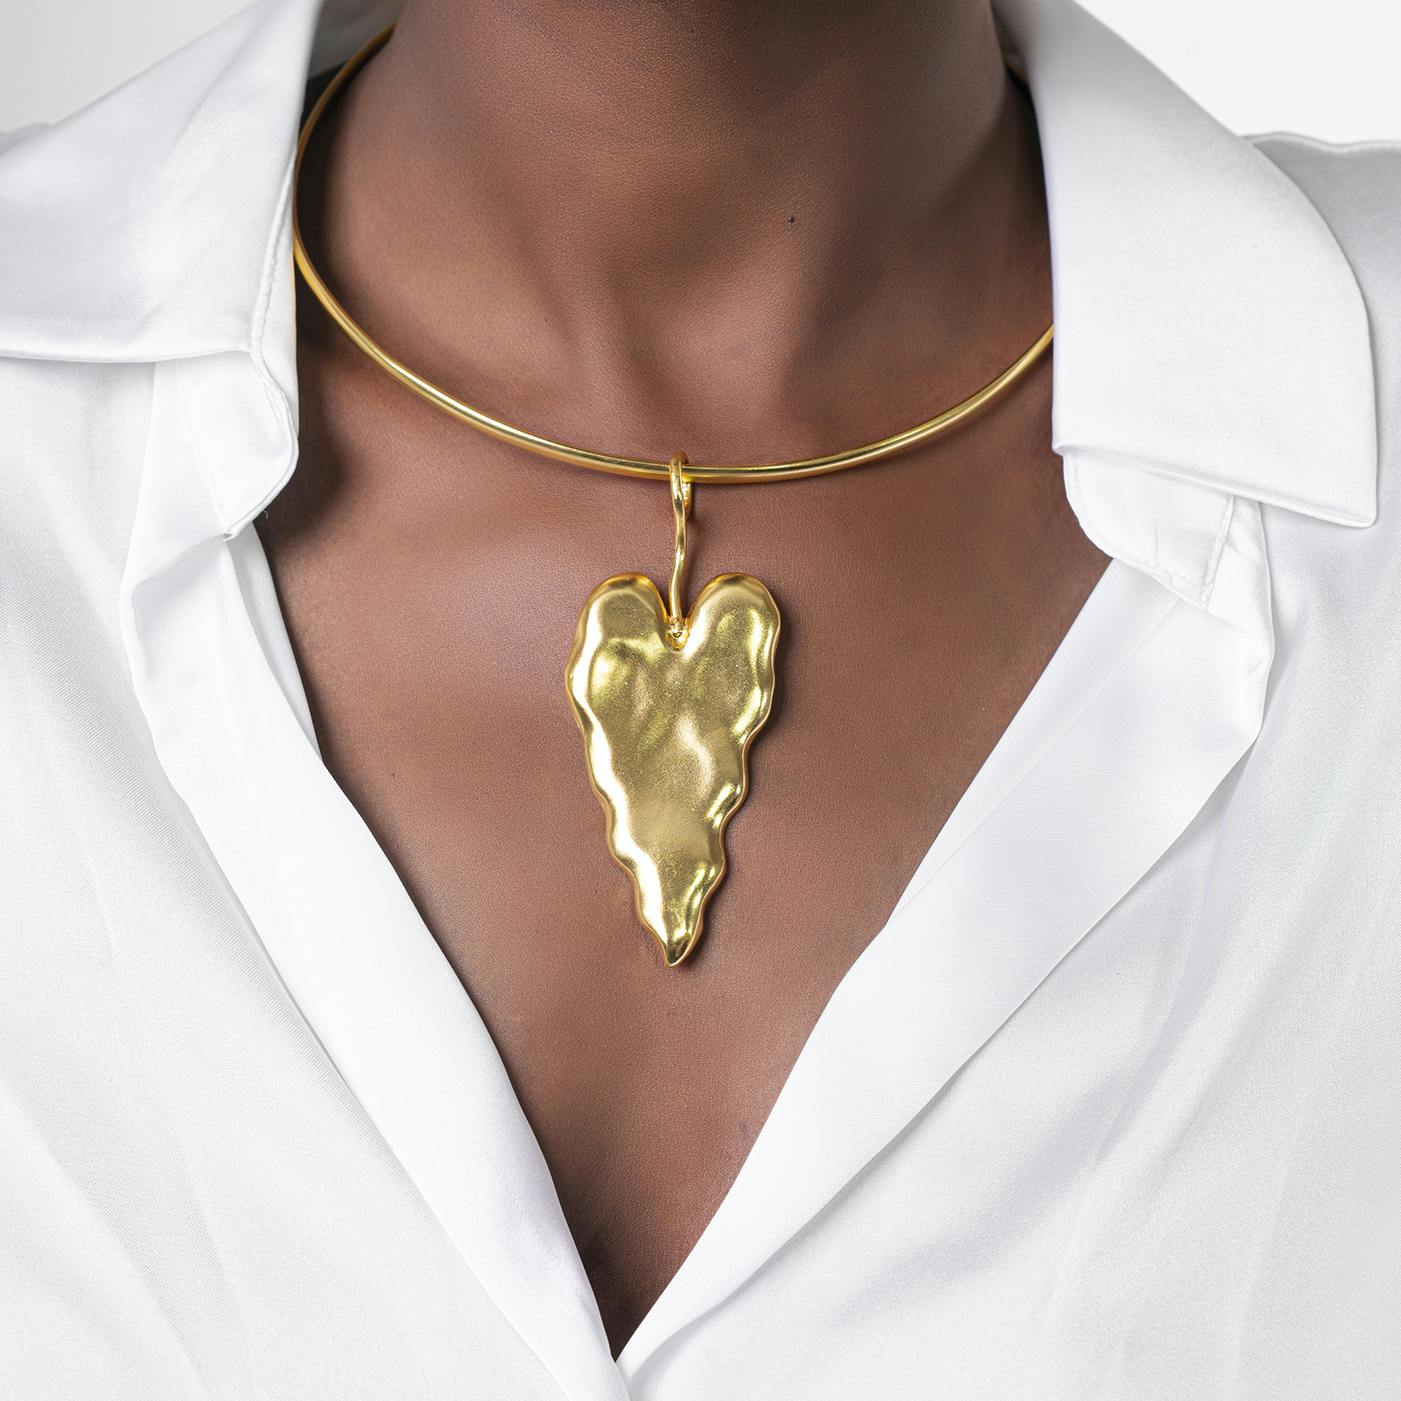 ANTHURIUM NECKLACE GOLD TONE, a product by Equiivalence